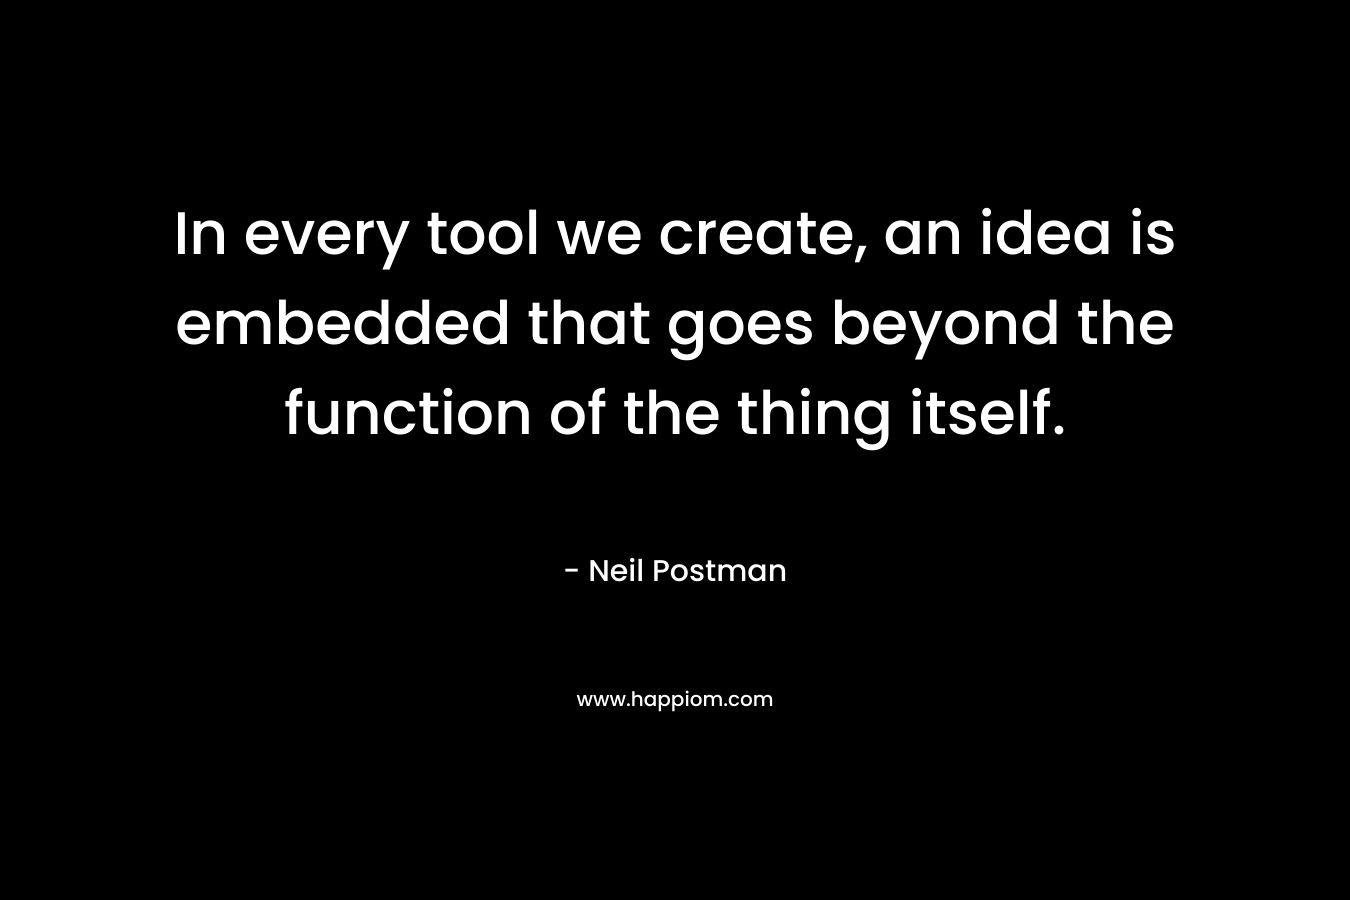 In every tool we create, an idea is embedded that goes beyond the function of the thing itself.